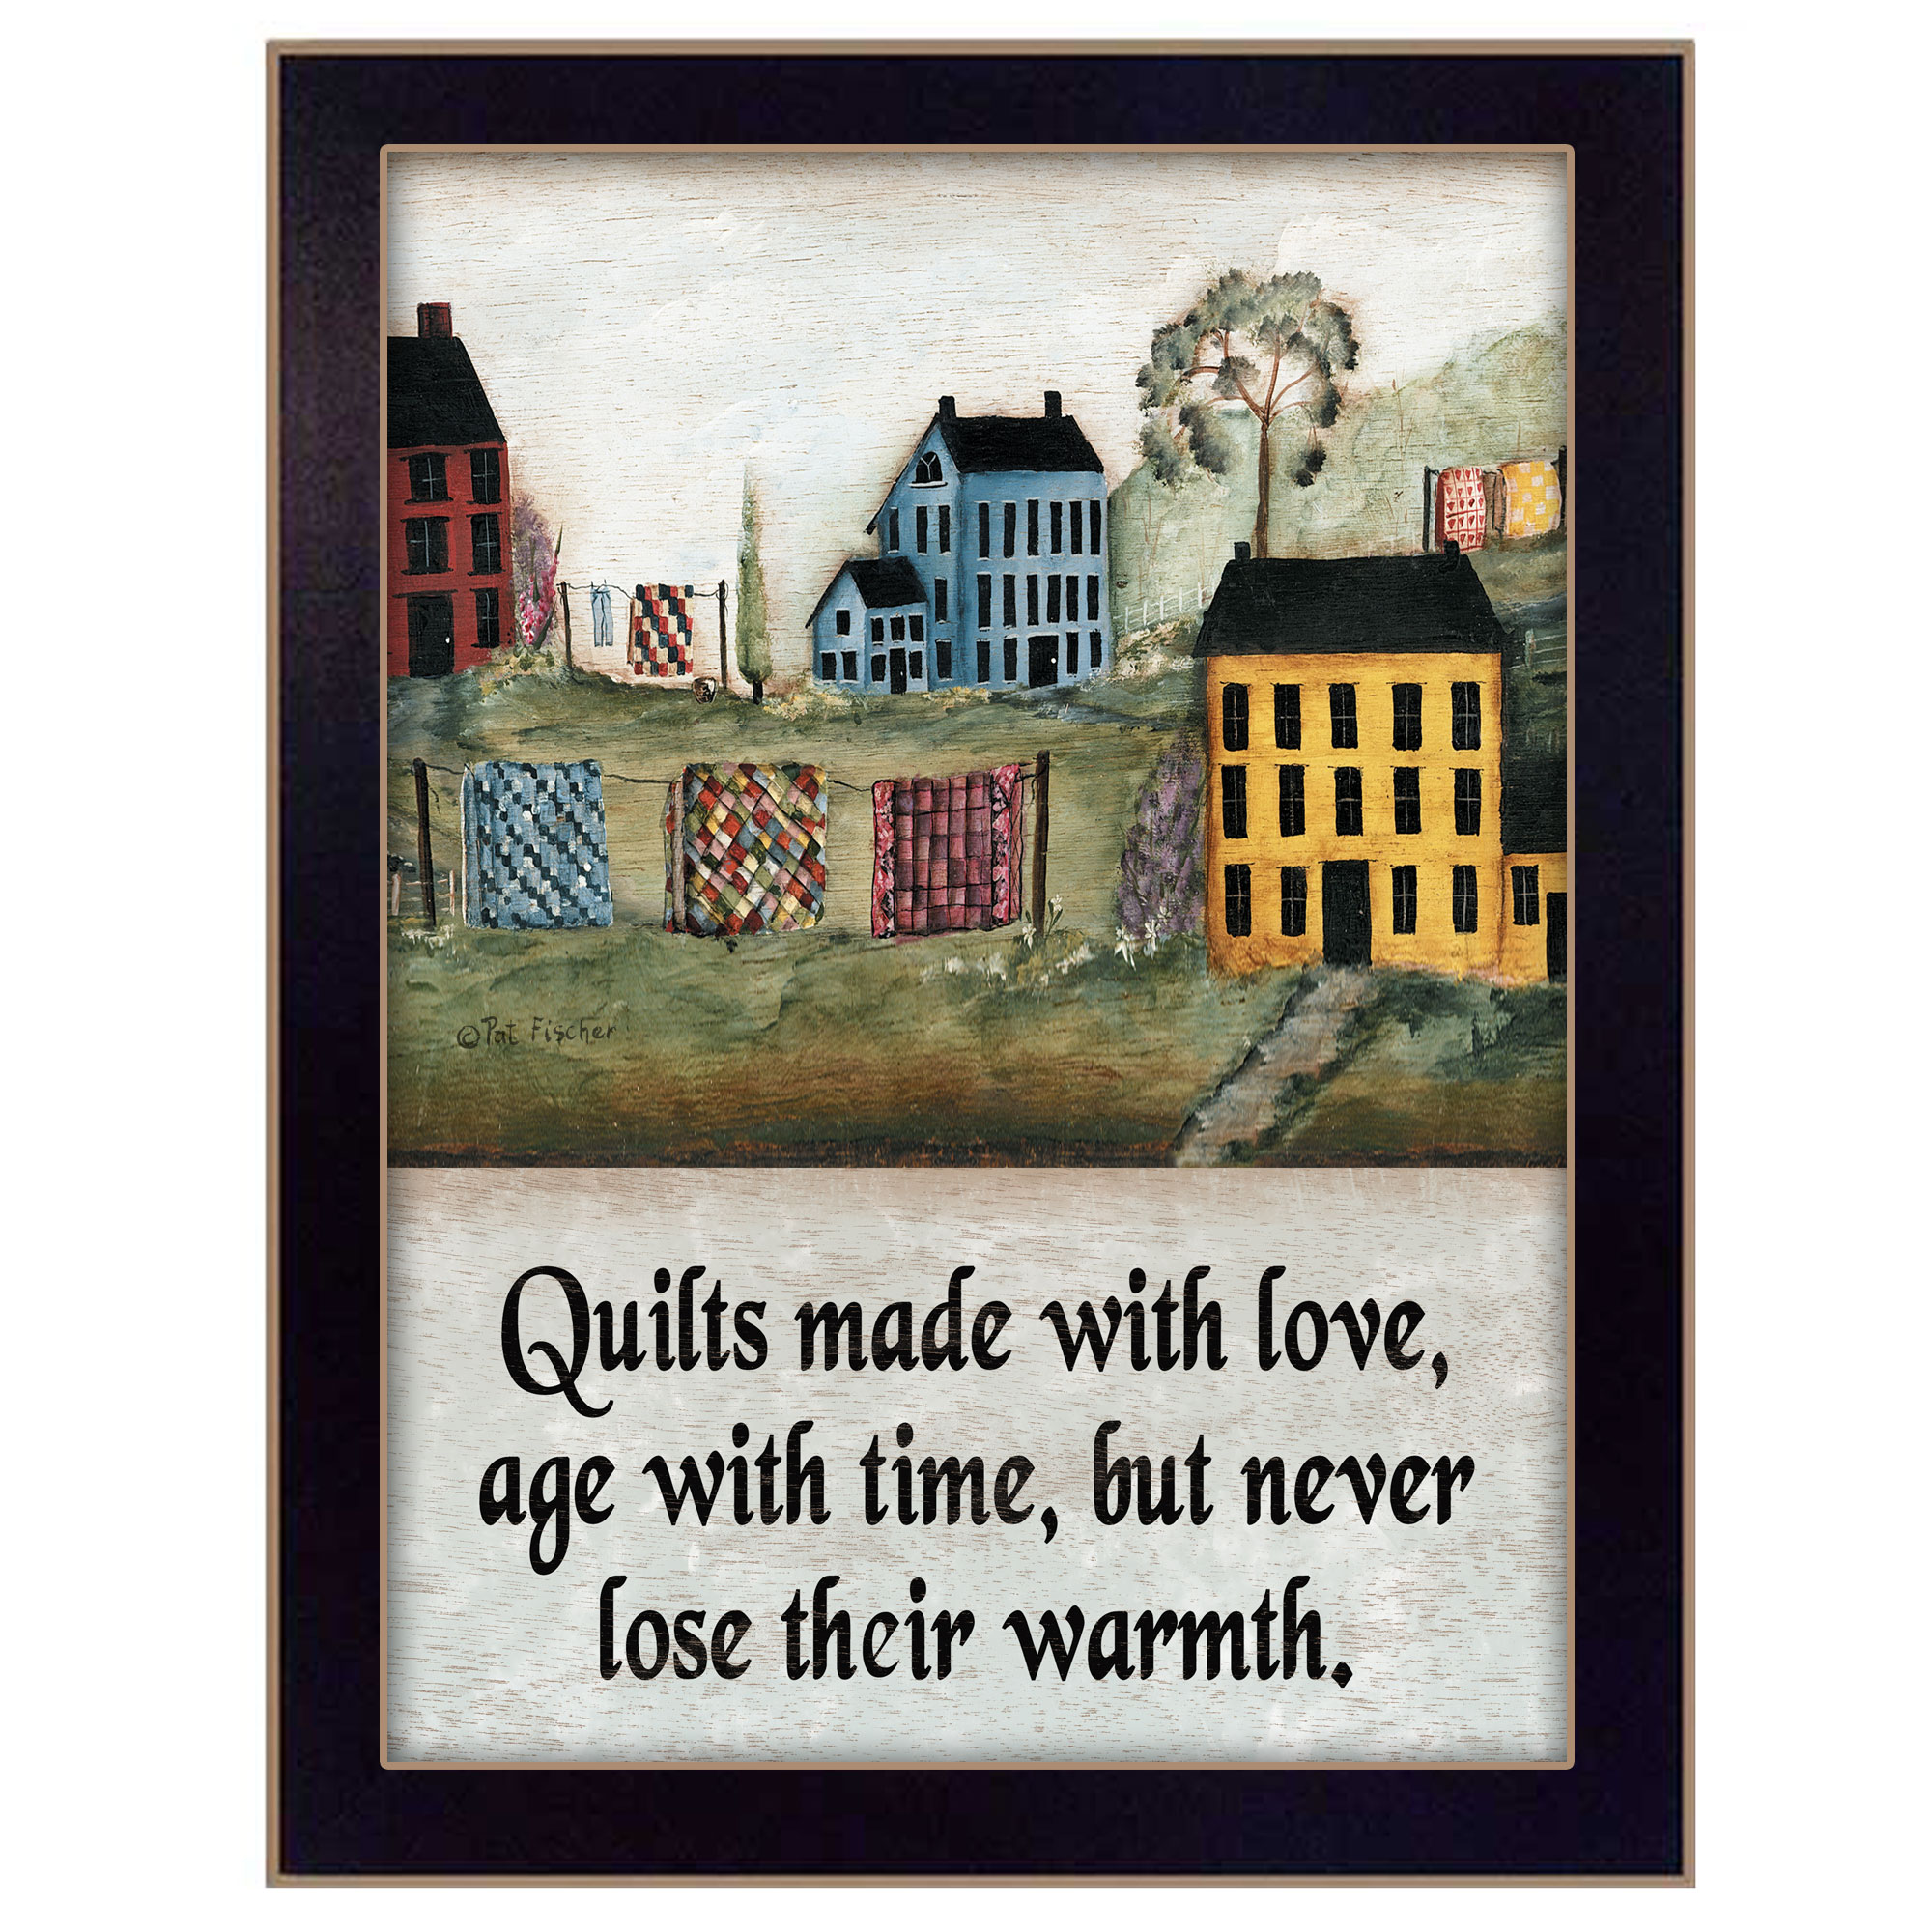 "Quilts Made With Love" By Pat Frisher, Printed Wall Art, Ready To Hang Framed Poster, Black Frame